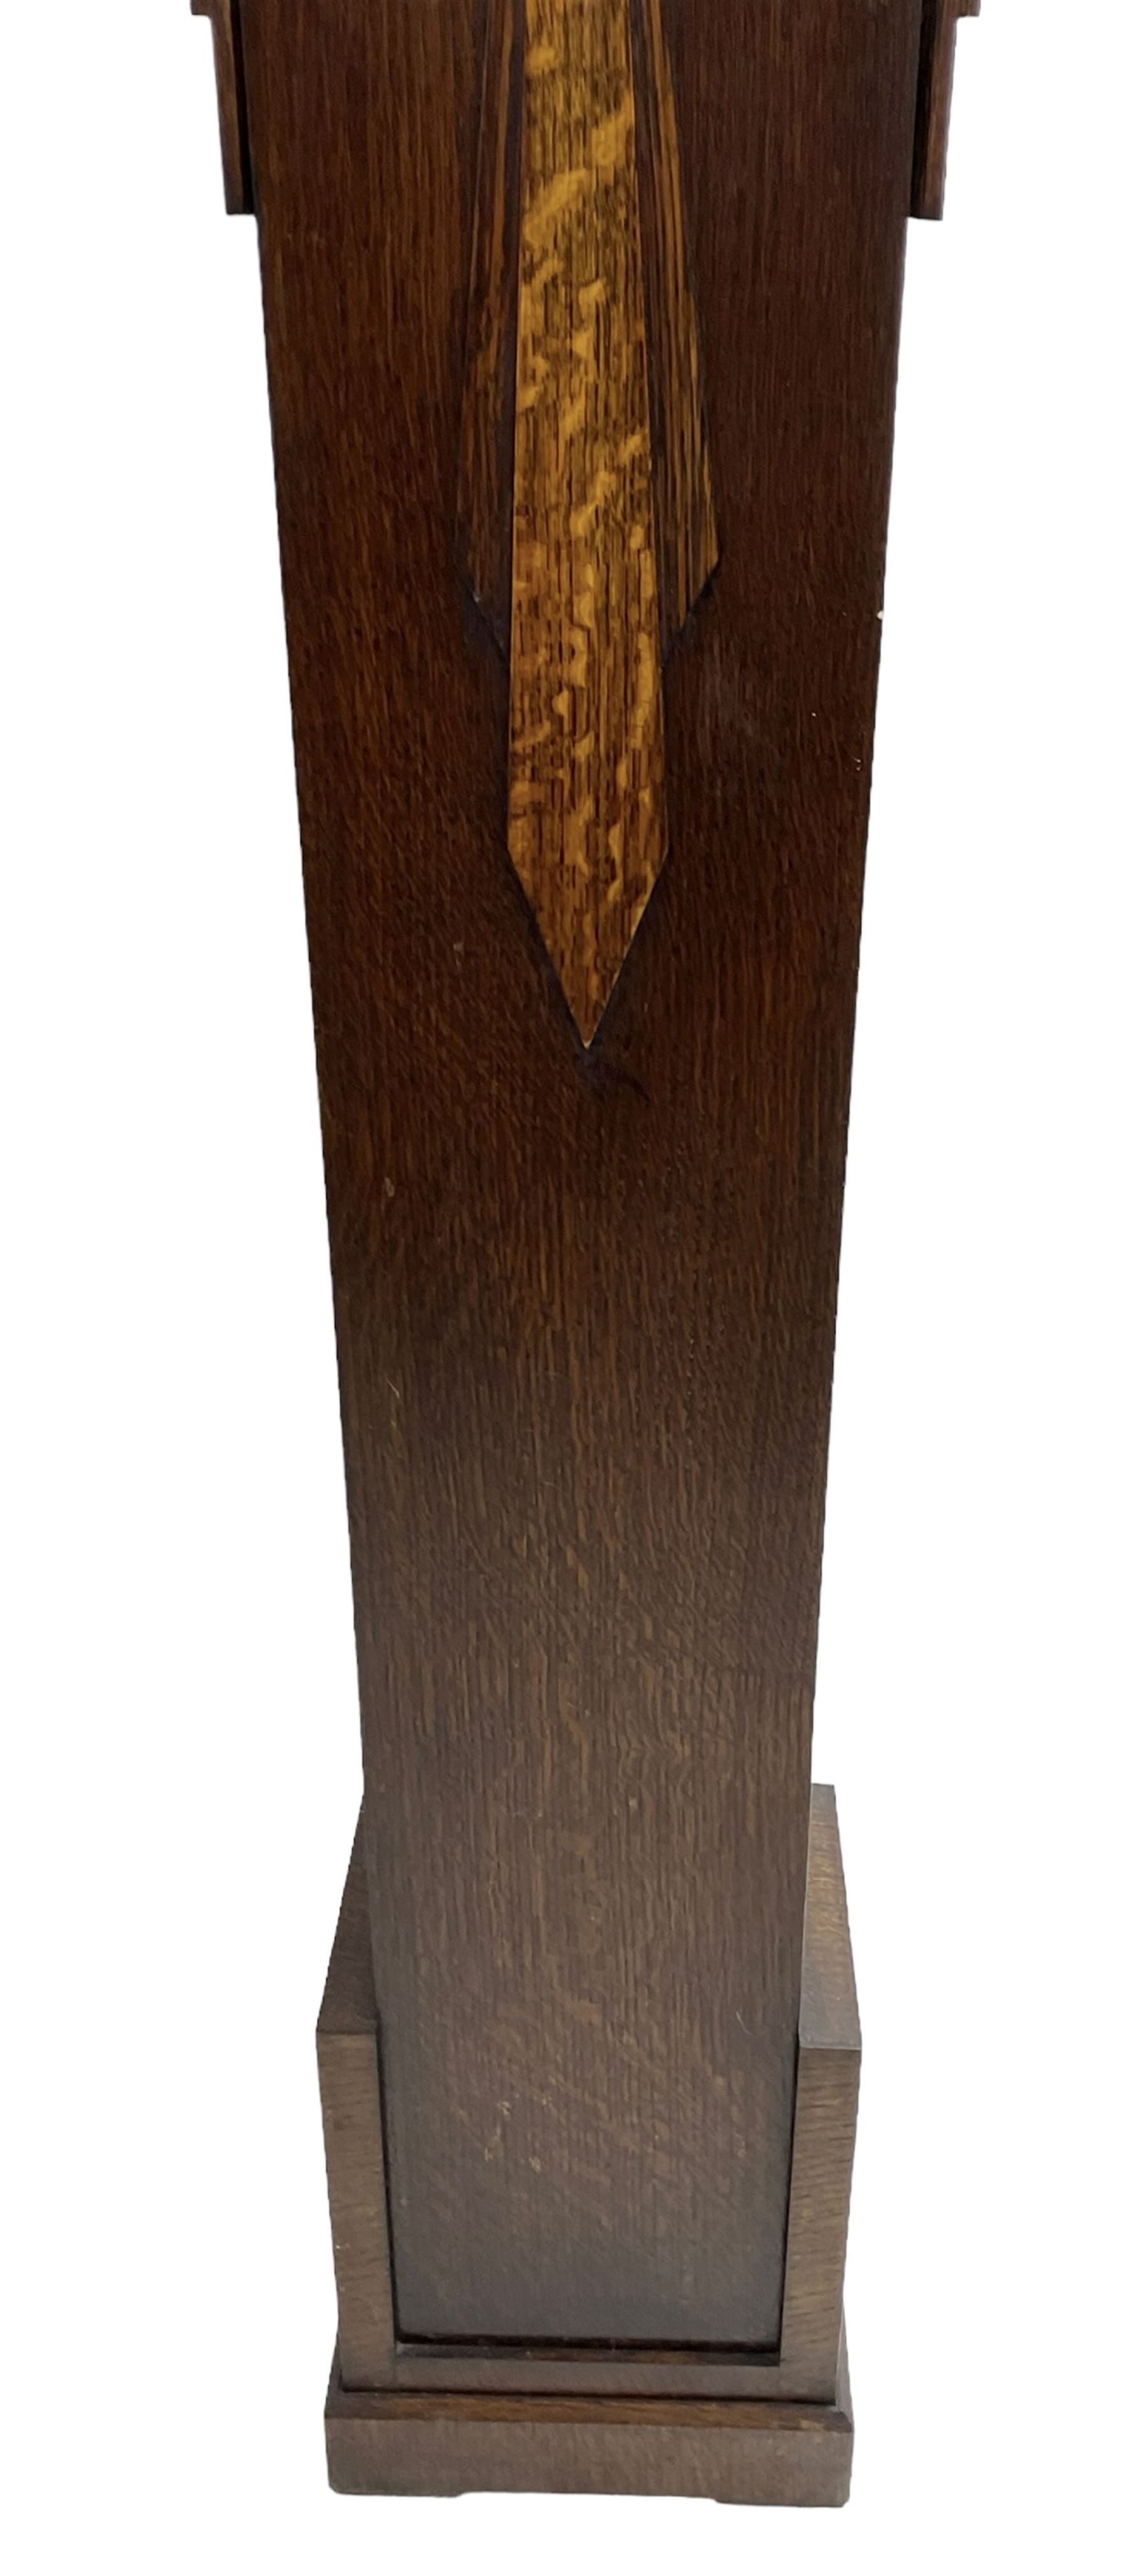 English - Early 20th century 8-day oak cased Art Deco grandmother clock - Image 3 of 5